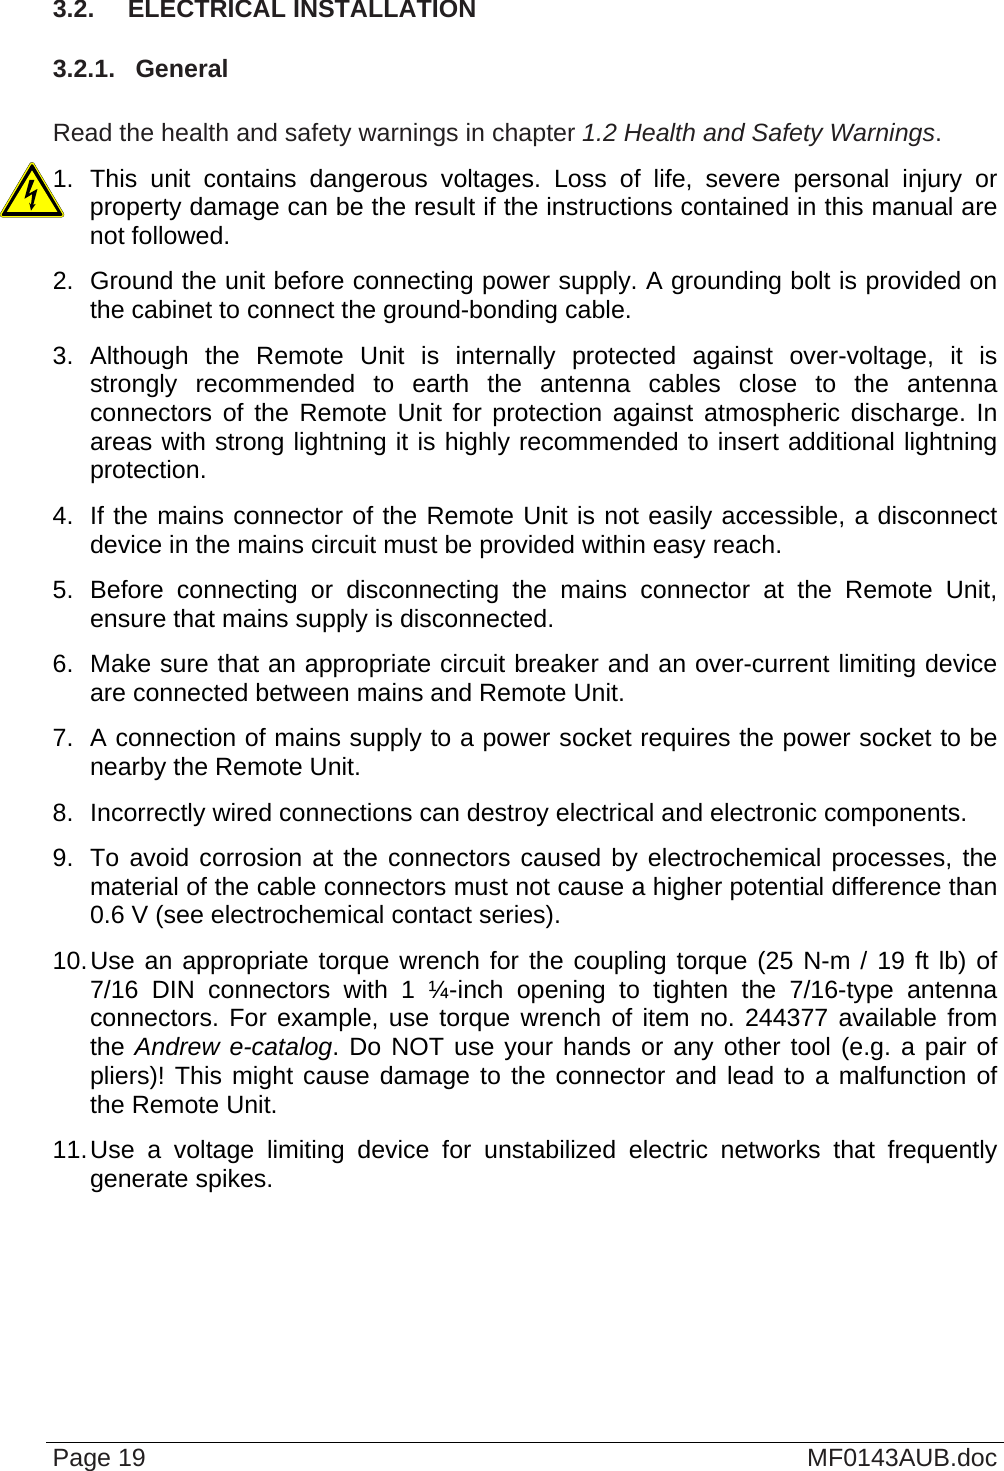  3.2.  ELECTRICAL INSTALLATION 3.2.1.  General  Read the health and safety warnings in chapter 1.2 Health and Safety Warnings. 1. This unit contains dangerous voltages. Loss of life, severe personal injury or property damage can be the result if the instructions contained in this manual are not followed. 2.  Ground the unit before connecting power supply. A grounding bolt is provided on the cabinet to connect the ground-bonding cable. 3. Although the Remote Unit is internally protected against over-voltage, it is strongly recommended to earth the antenna cables close to the antenna connectors of the Remote Unit for protection against atmospheric discharge. In areas with strong lightning it is highly recommended to insert additional lightning protection. 4.  If the mains connector of the Remote Unit is not easily accessible, a disconnect device in the mains circuit must be provided within easy reach. 5. Before connecting or disconnecting the mains connector at the Remote Unit, ensure that mains supply is disconnected. 6.  Make sure that an appropriate circuit breaker and an over-current limiting device are connected between mains and Remote Unit. 7.  A connection of mains supply to a power socket requires the power socket to be nearby the Remote Unit. 8.  Incorrectly wired connections can destroy electrical and electronic components. 9.  To avoid corrosion at the connectors caused by electrochemical processes, the material of the cable connectors must not cause a higher potential difference than 0.6 V (see electrochemical contact series). 10. Use an appropriate torque wrench for the coupling torque (25 N-m / 19 ft lb) of 7/16 DIN connectors with 1 ¼-inch opening to tighten the 7/16-type antenna connectors. For example, use torque wrench of item no. 244377 available from the Andrew e-catalog. Do NOT use your hands or any other tool (e.g. a pair of pliers)! This might cause damage to the connector and lead to a malfunction of the Remote Unit. 11. Use a voltage limiting device for unstabilized electric networks that frequently generate spikes.  Page 19  MF0143AUB.doc 